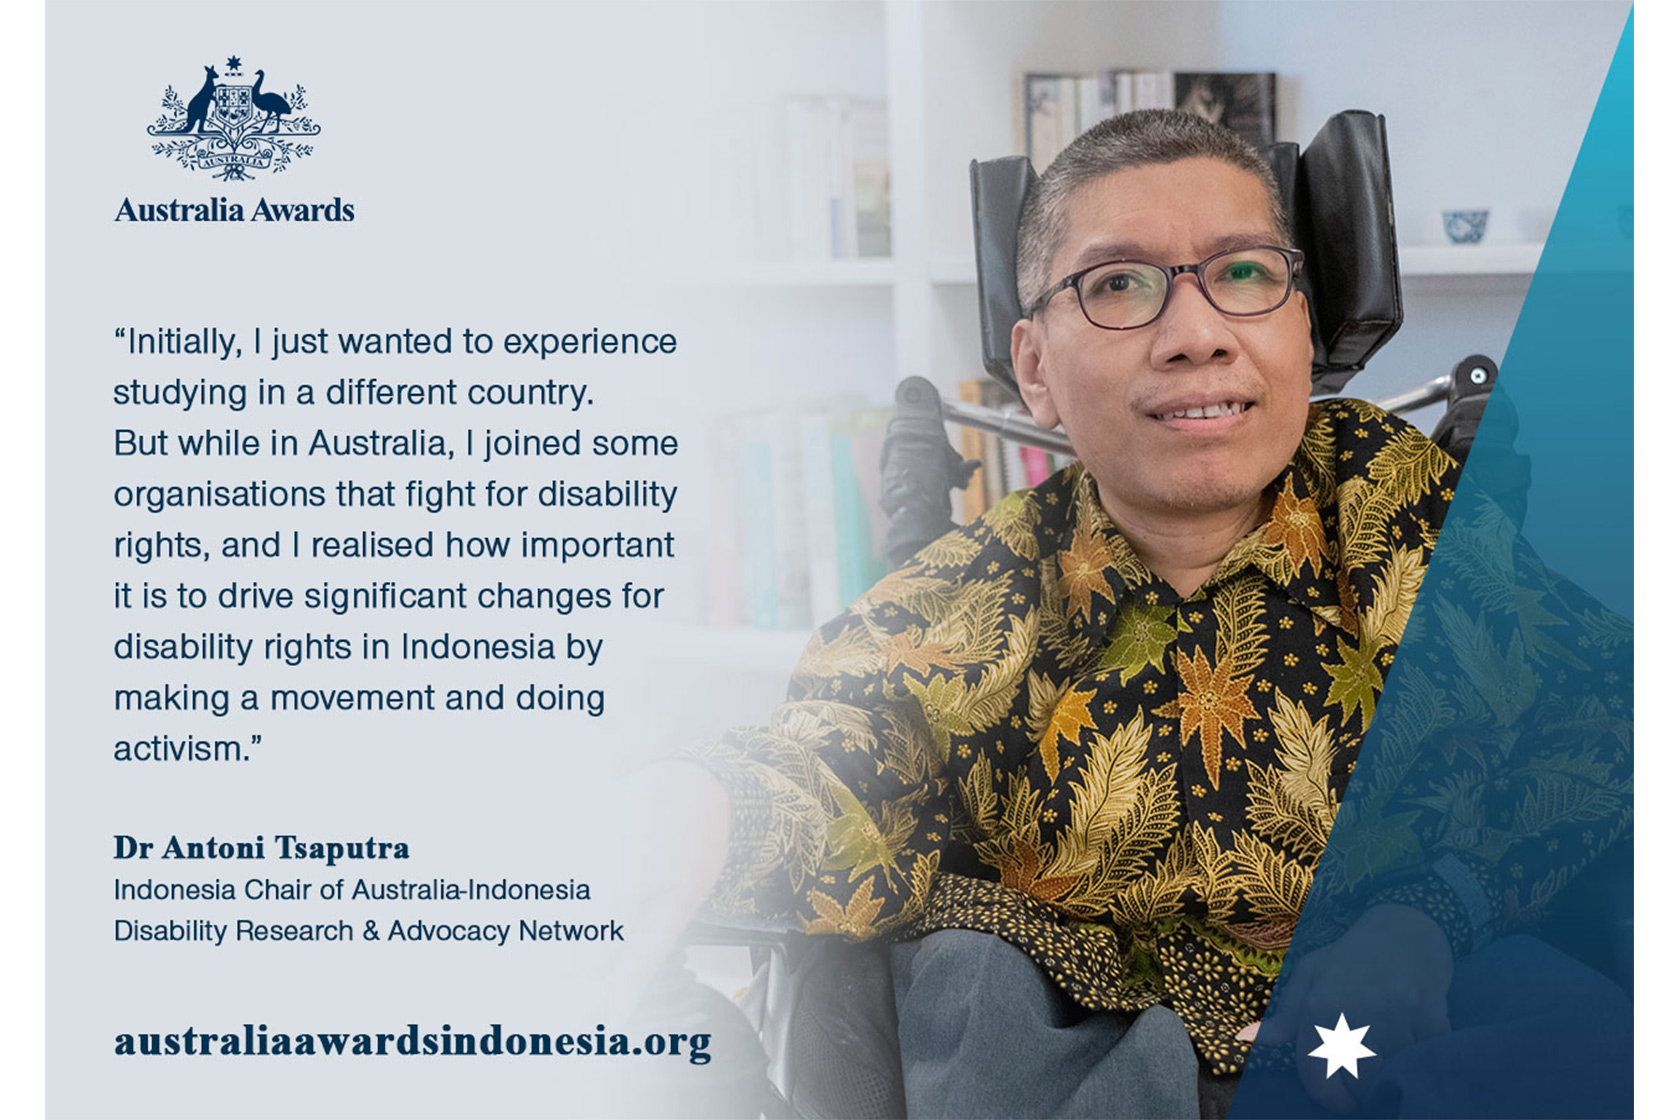 A testimonial from Dr Antoni Tsaputra about his experience studying and living in Australia